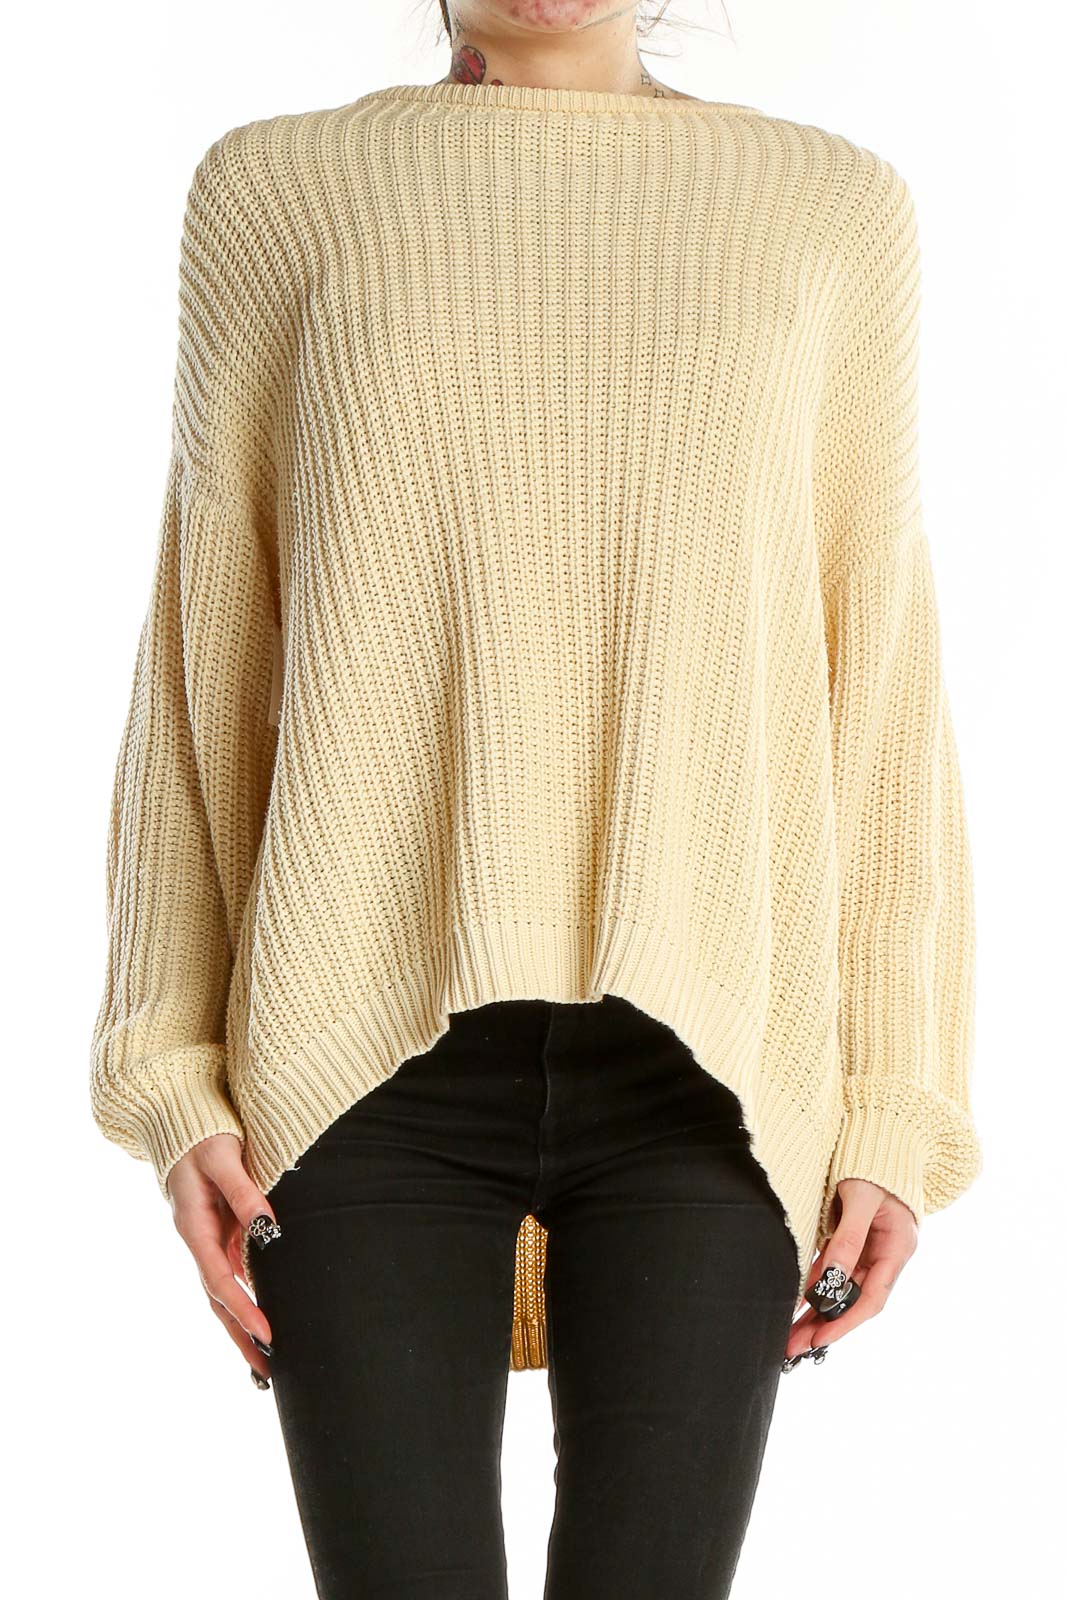 Cream Long Sleeve Sweater Front